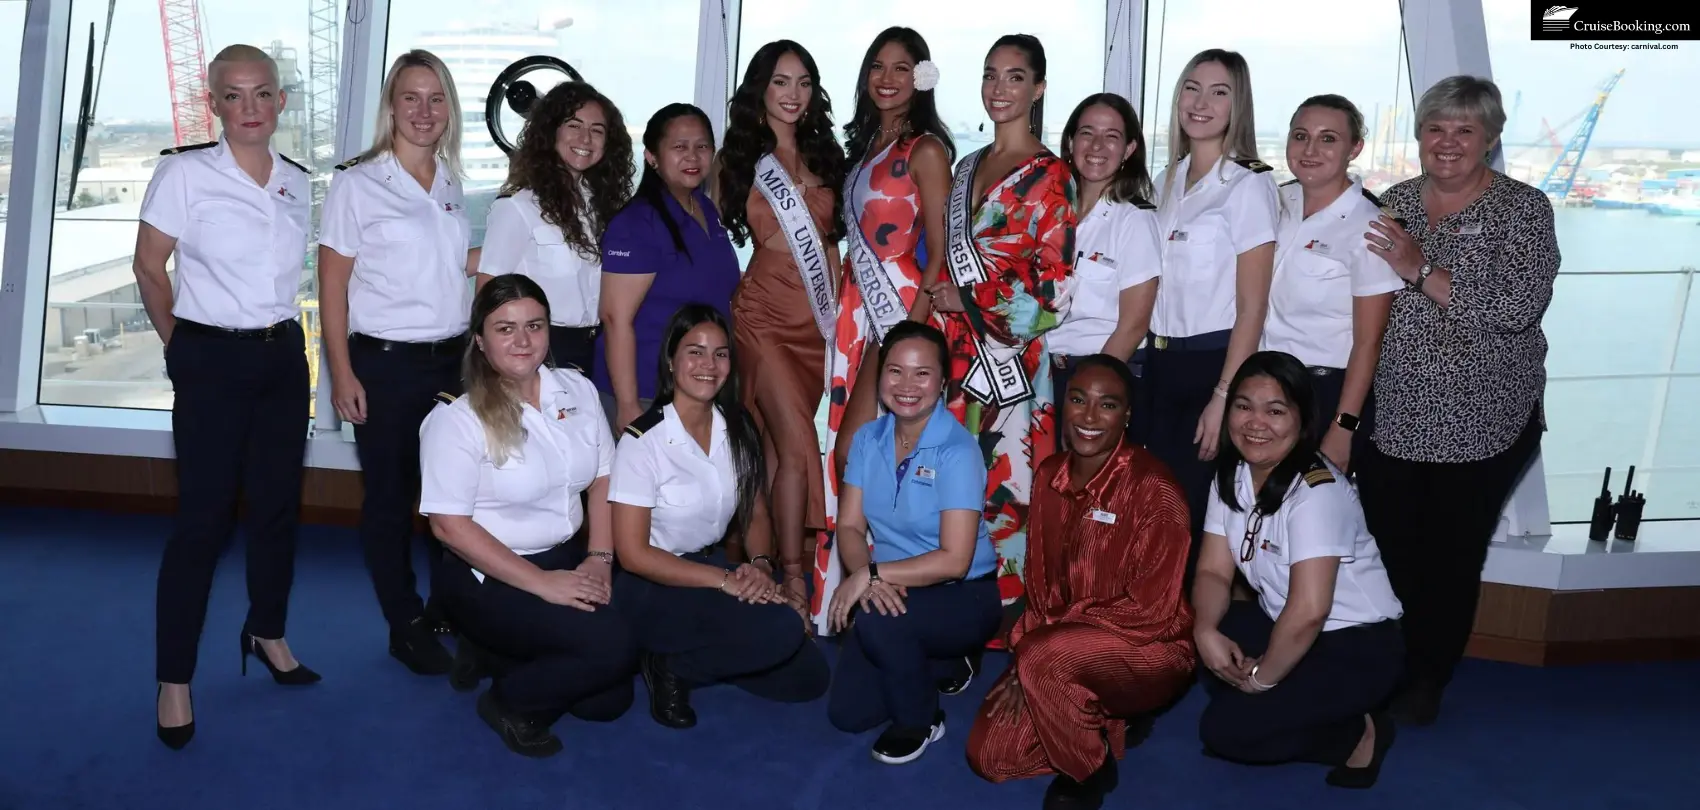 Miss Universe Celebrates Women’s Equality Day Onboard Carnival Vista